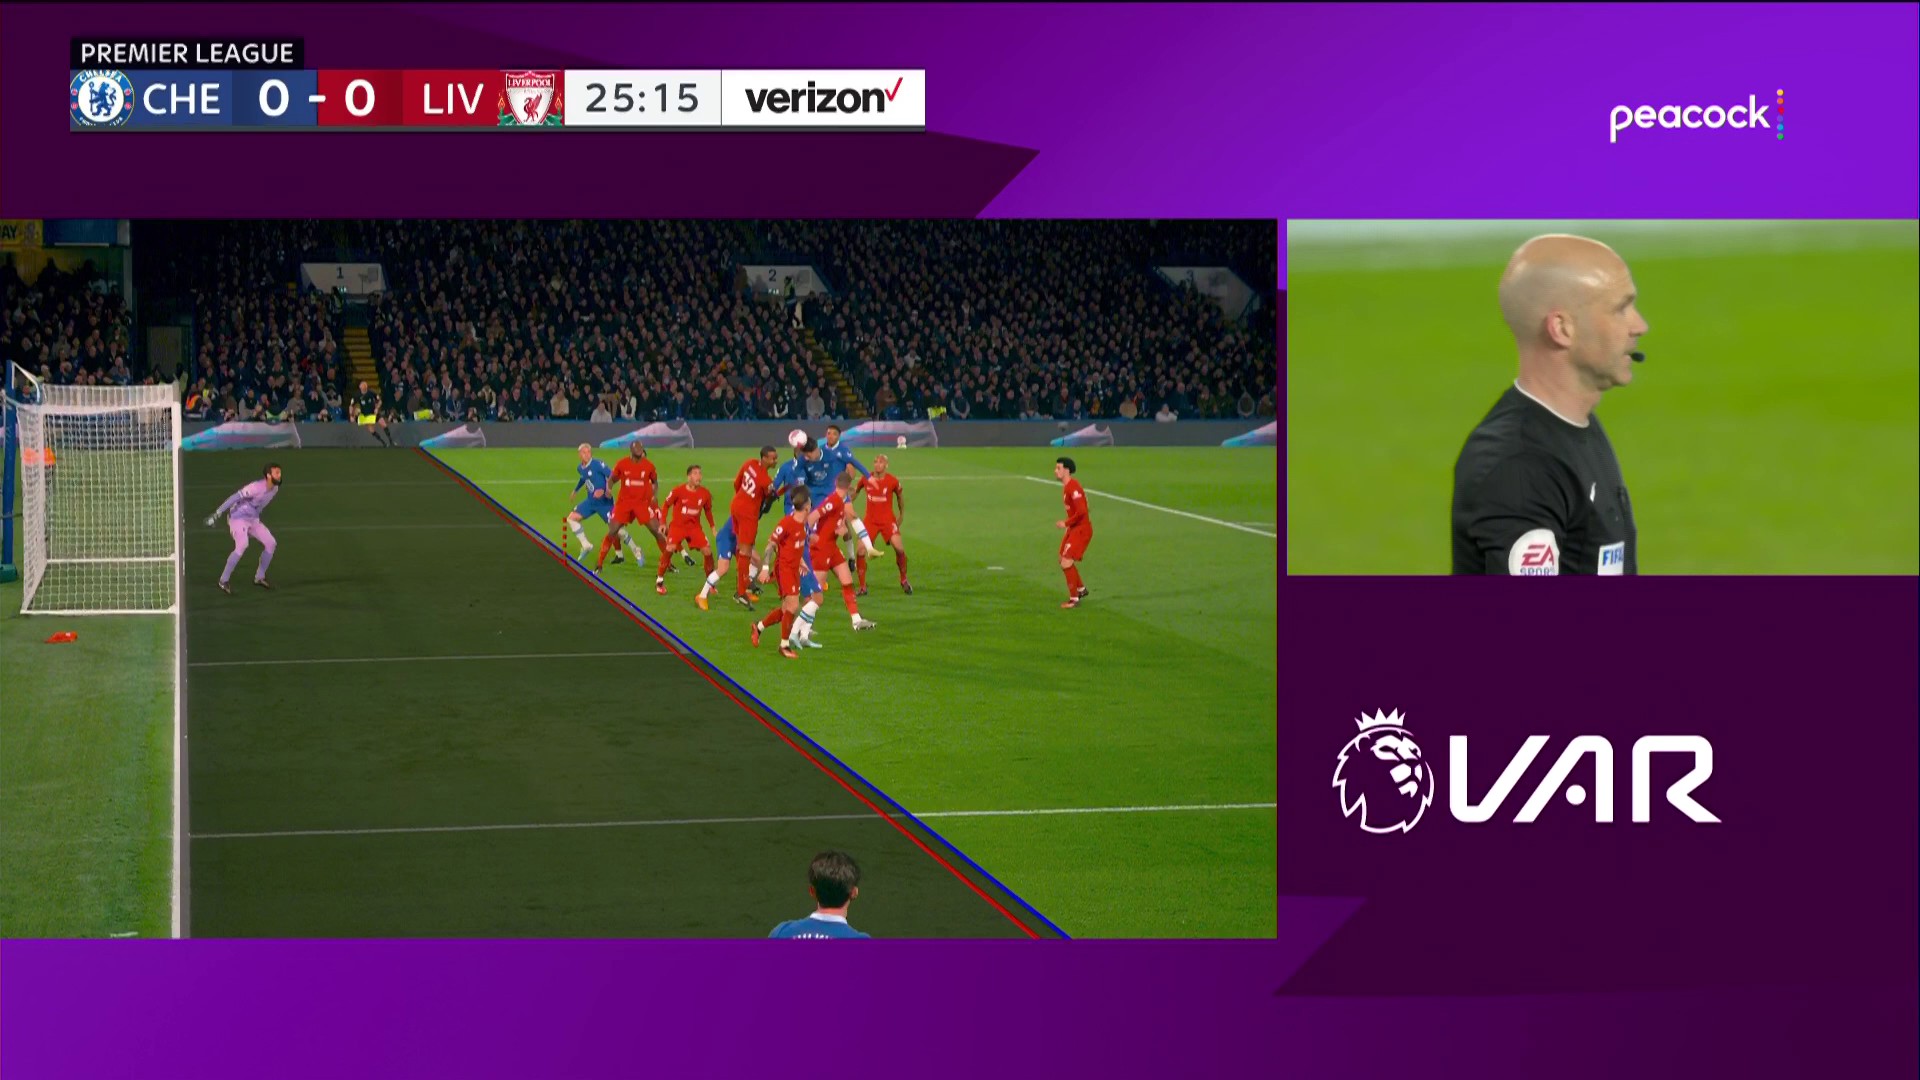 Chelsea thought they took the lead, but the goal is disallowed because of a offside call. 

📺: @peacock 
#MyPLMorning | #CHELIV”